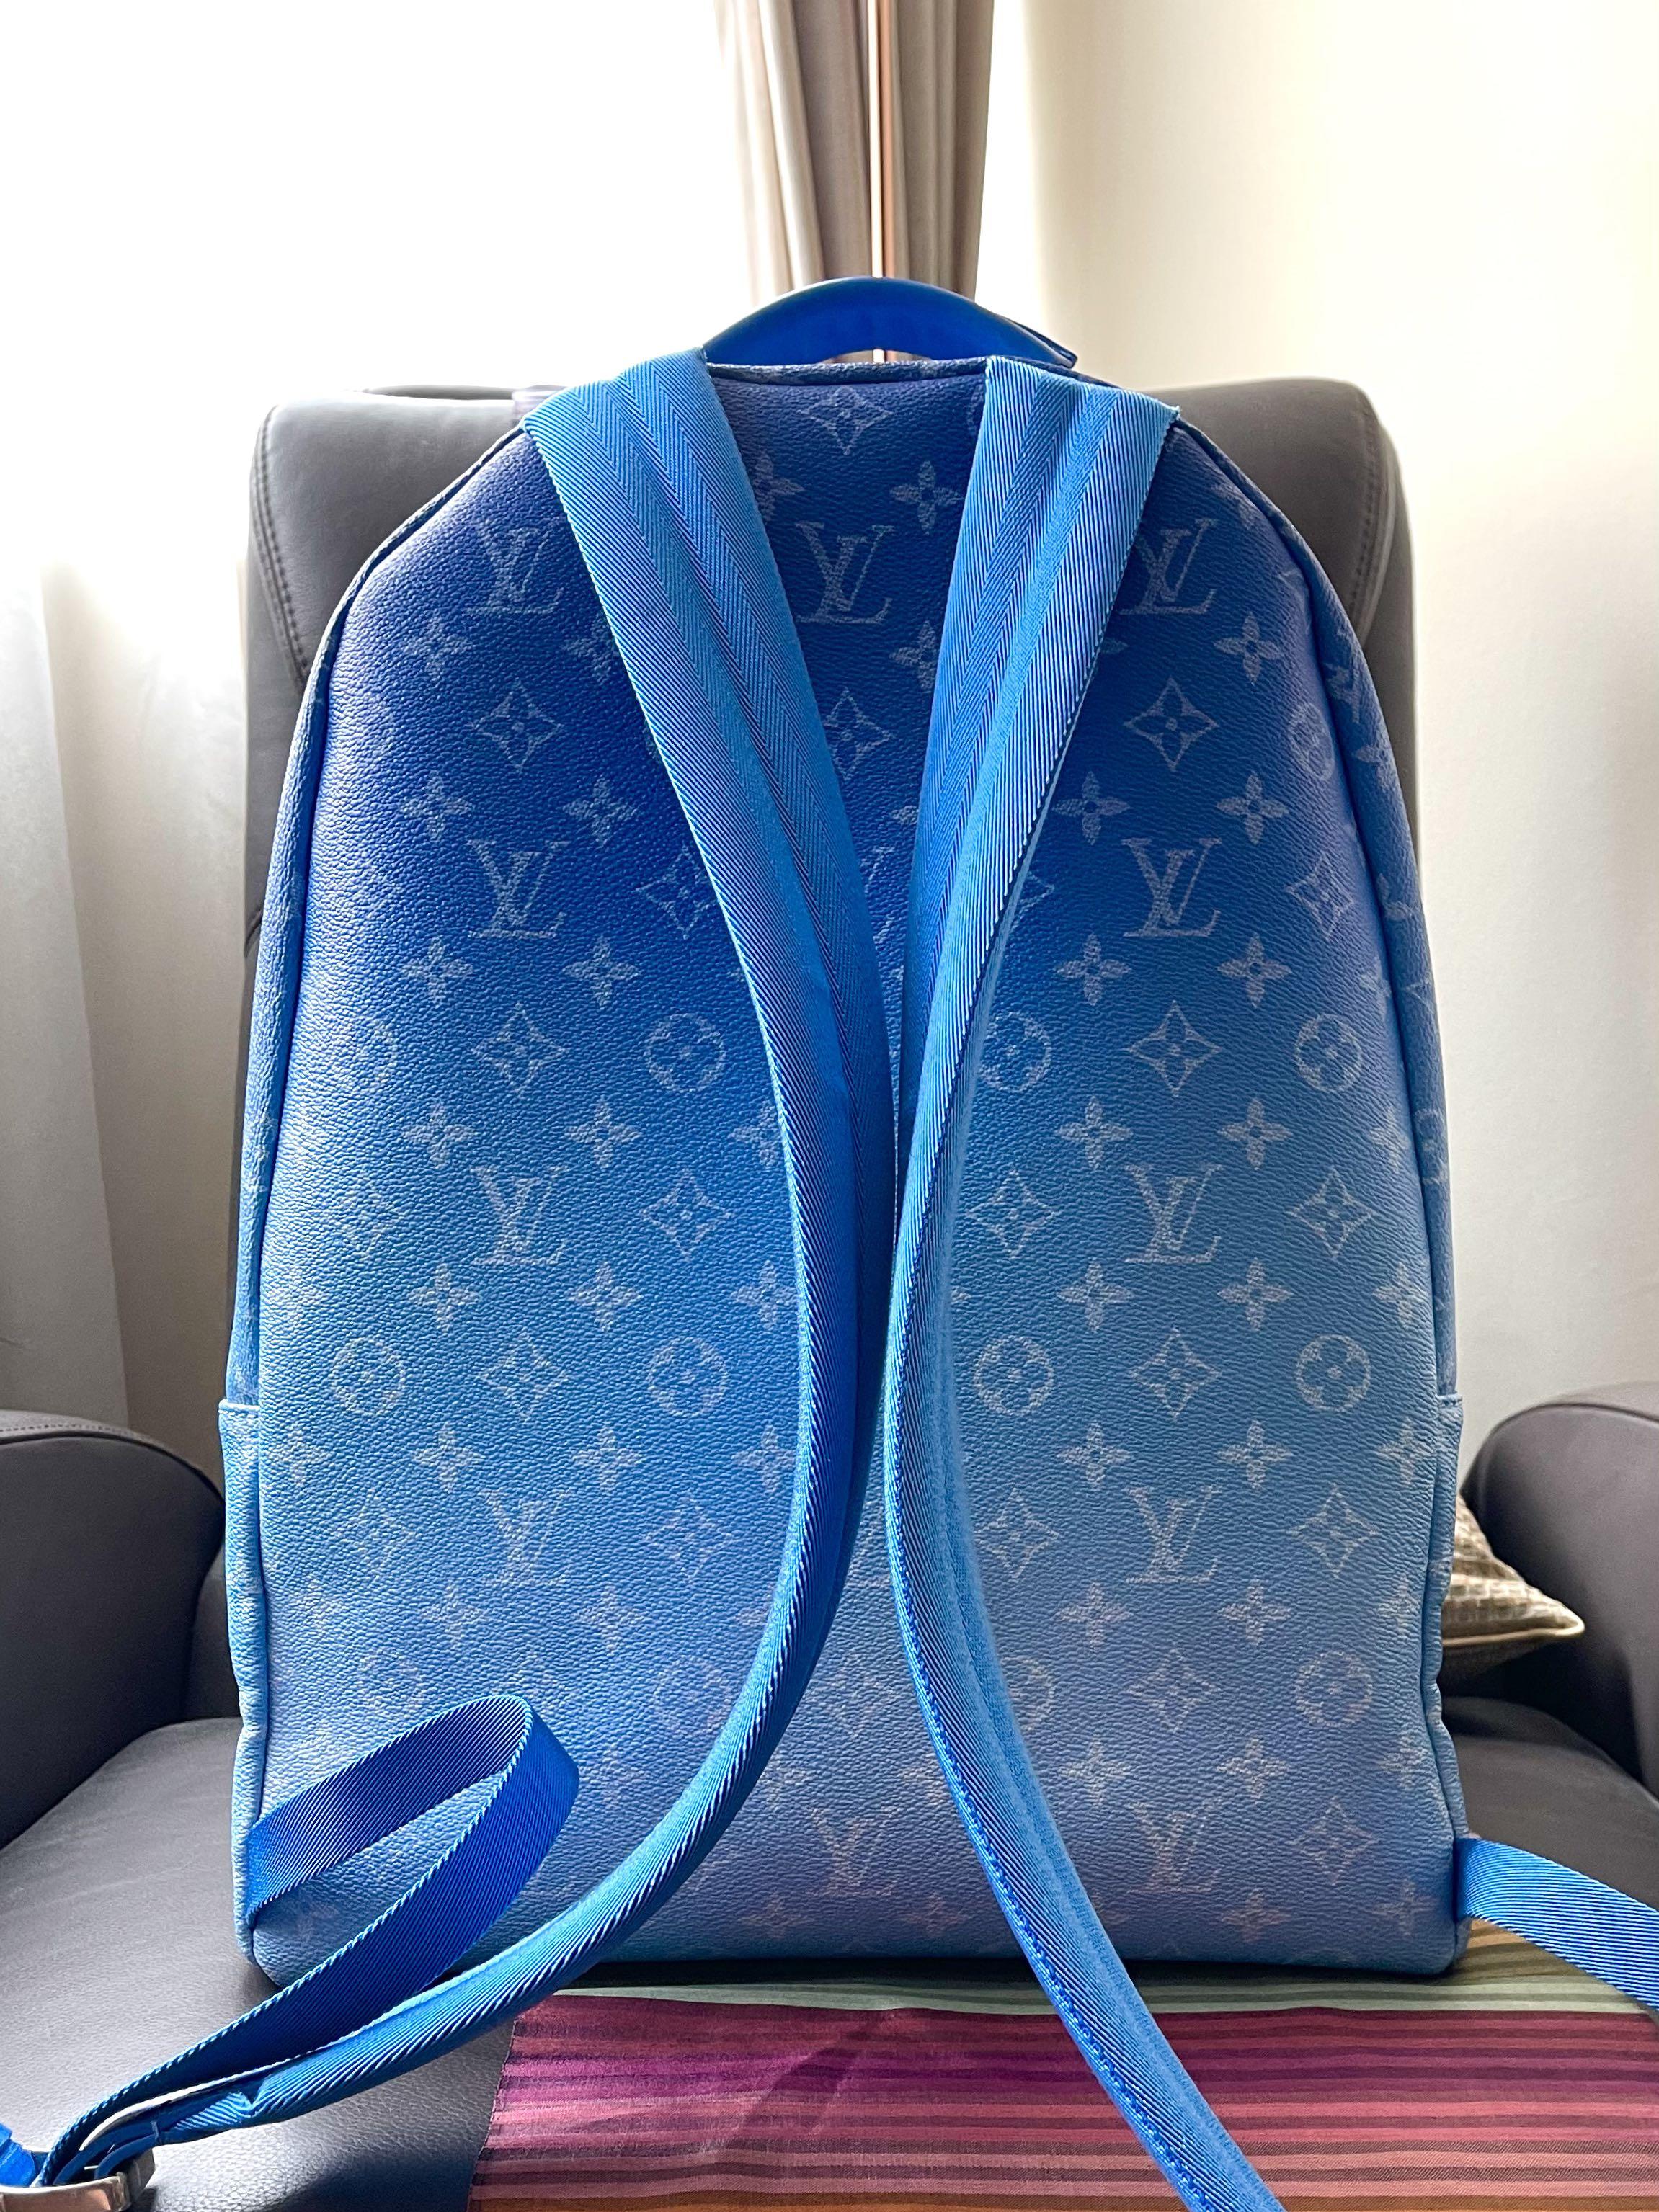  Louis Vuitton M45441 Backpack, Multi Pocket, Monogram Clouds  Bag, Backpack, Canvas, Men's Used, blue/white : Clothing, Shoes & Jewelry